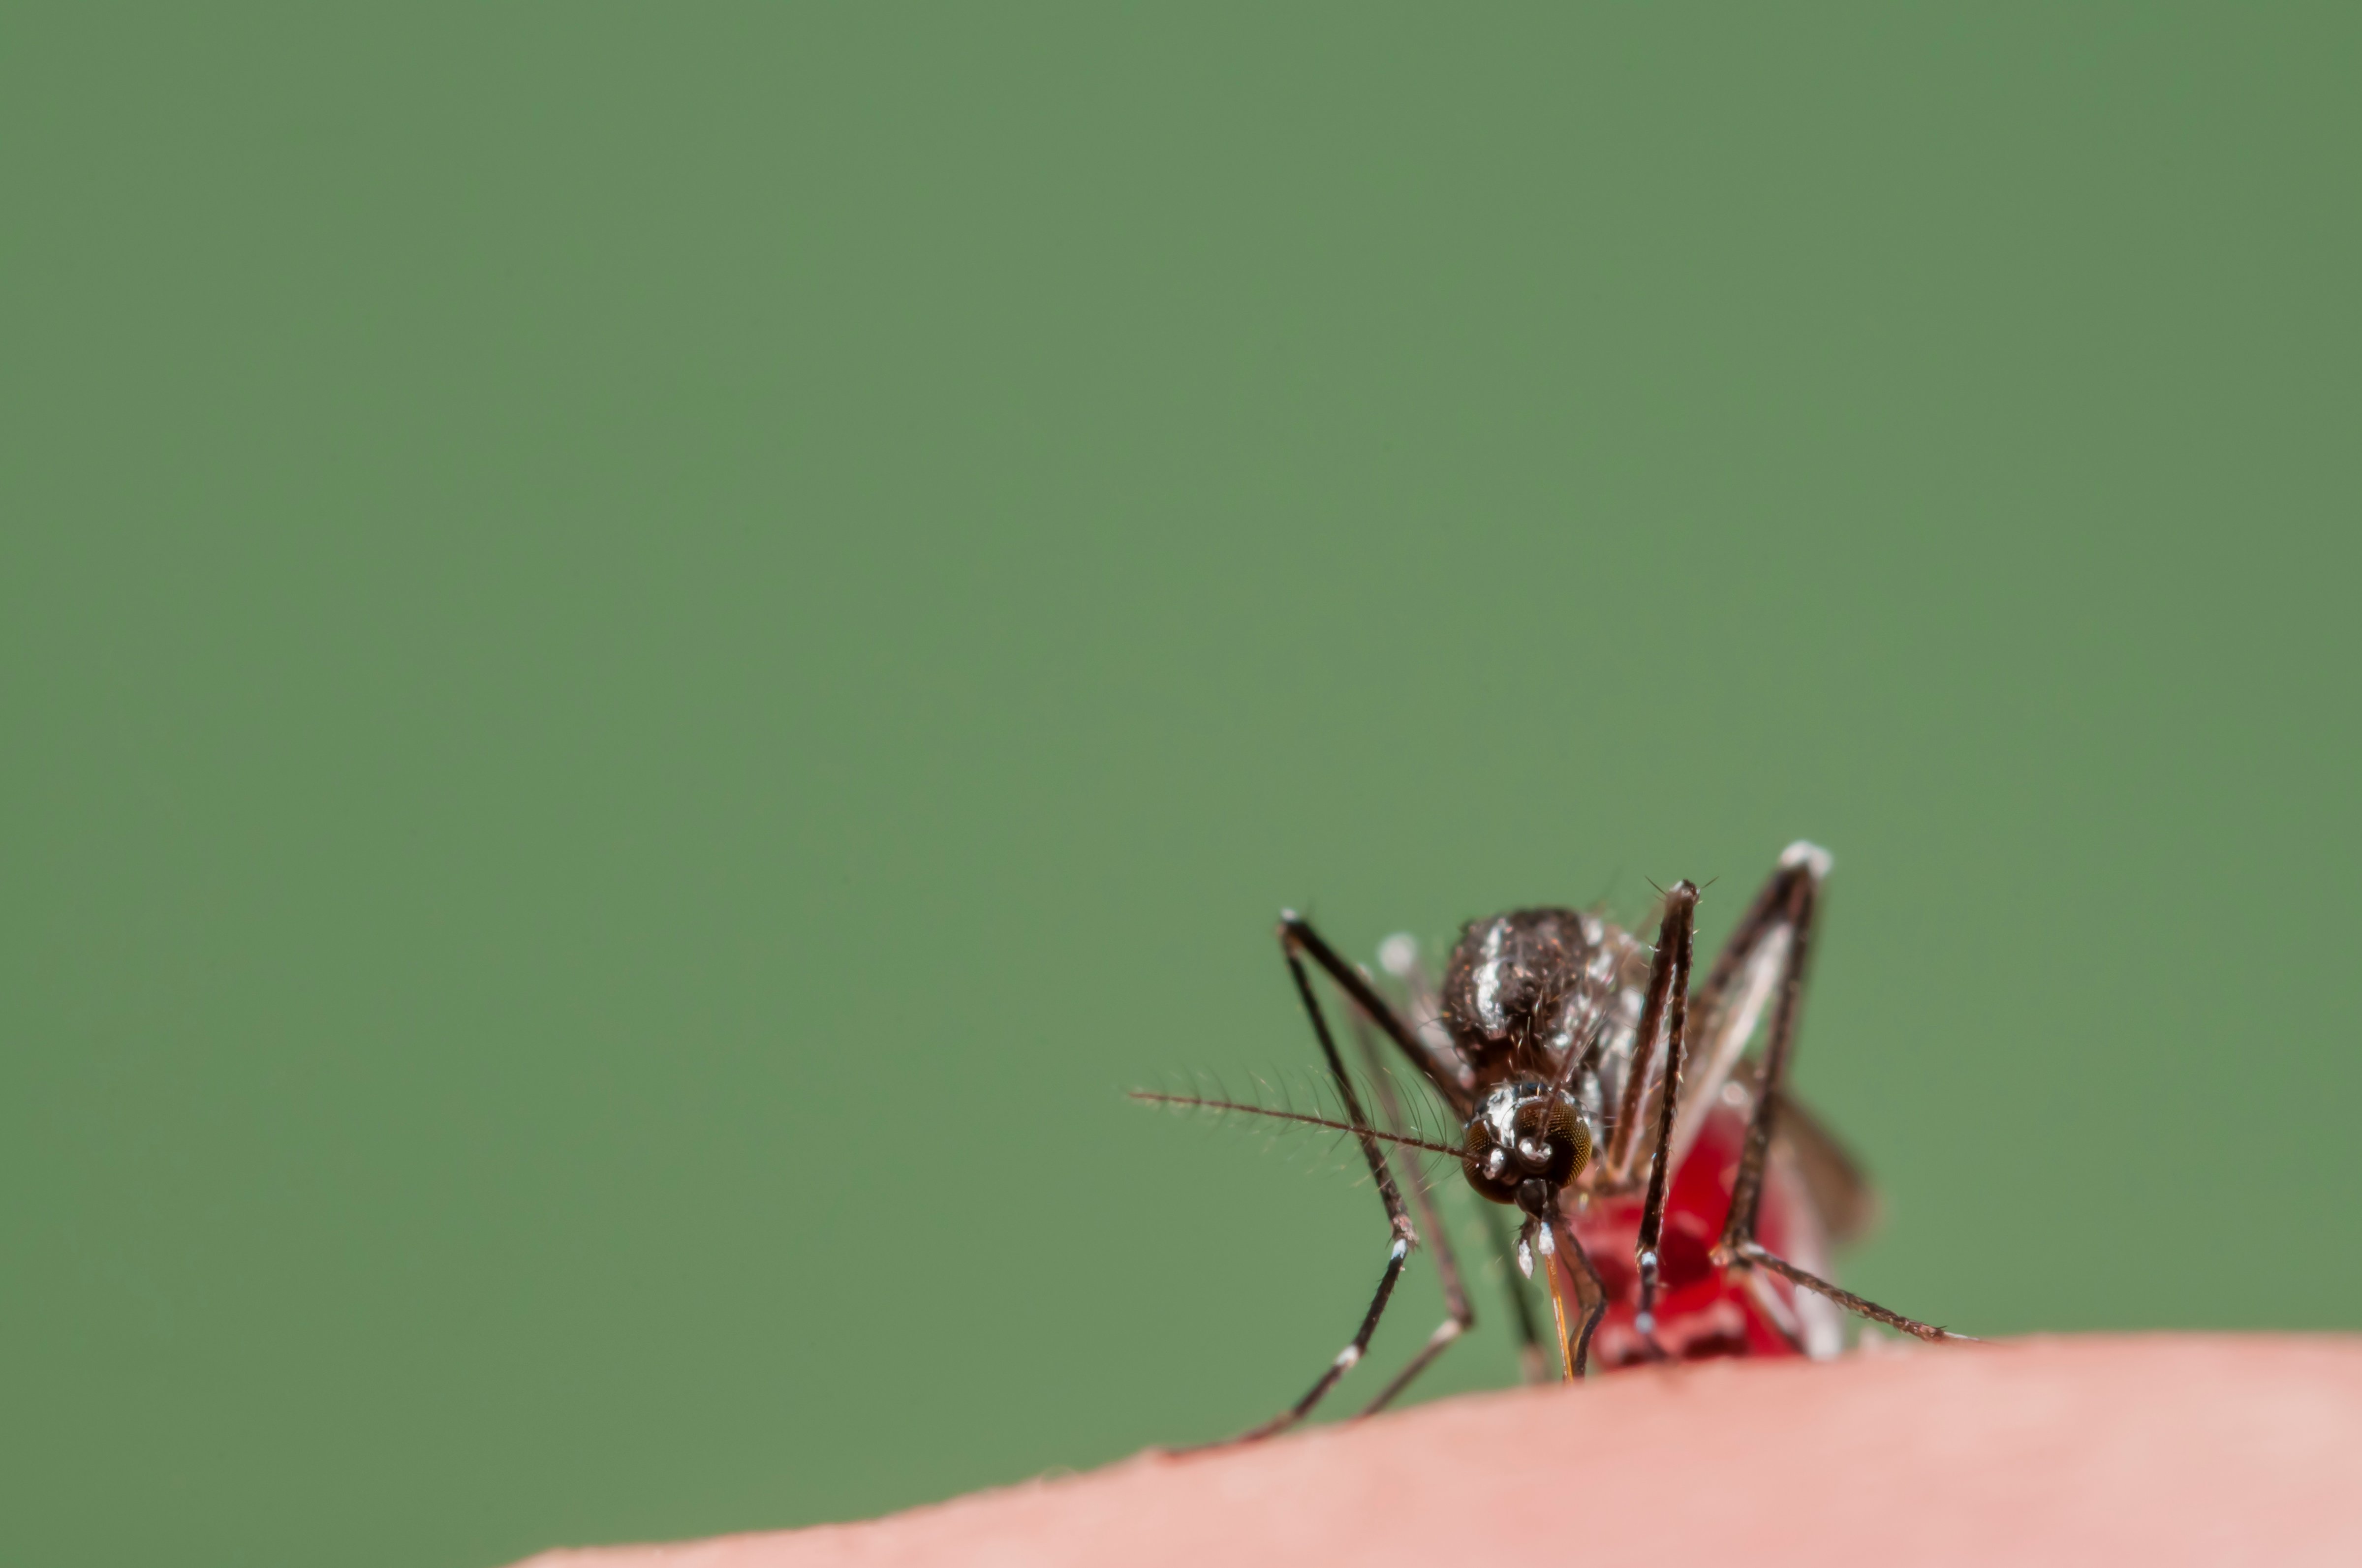 Asian Tiger Mosquito biting, Spain